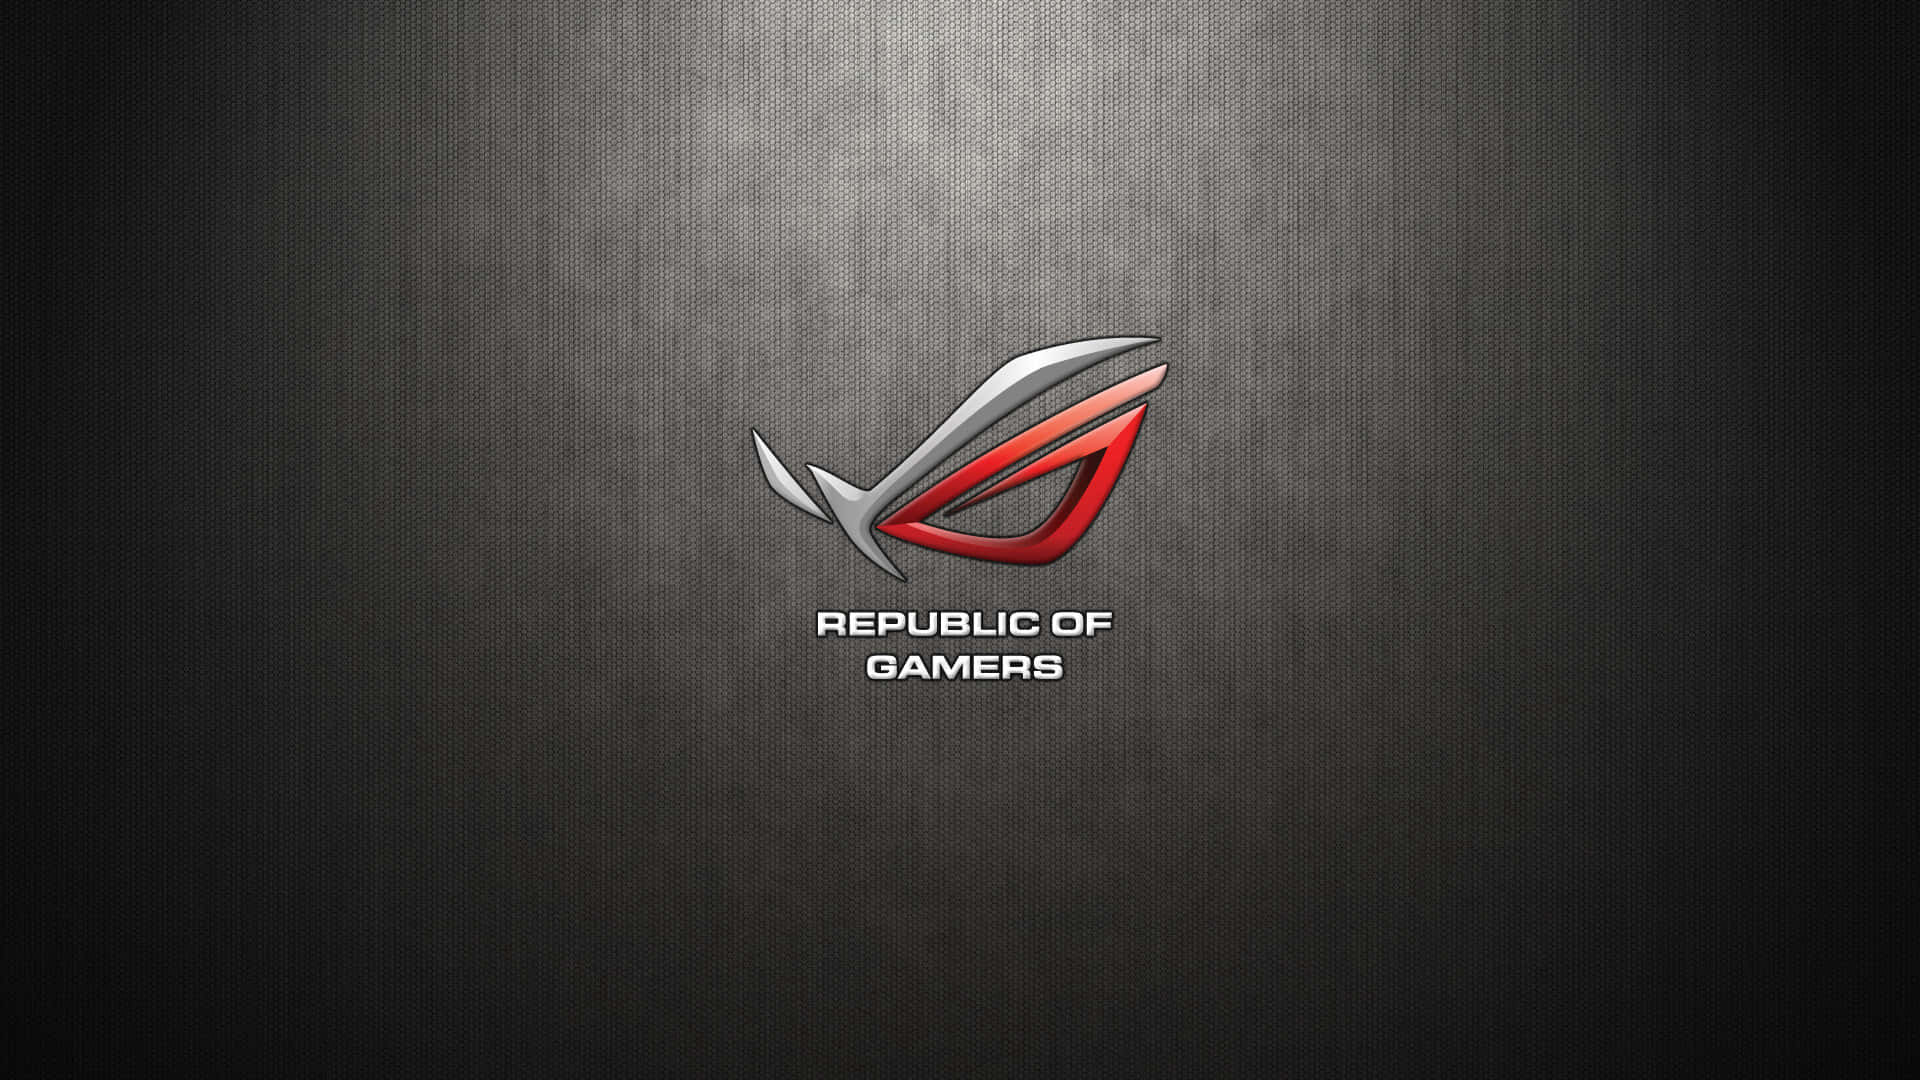 Light up the gaming arena with Asus Rog